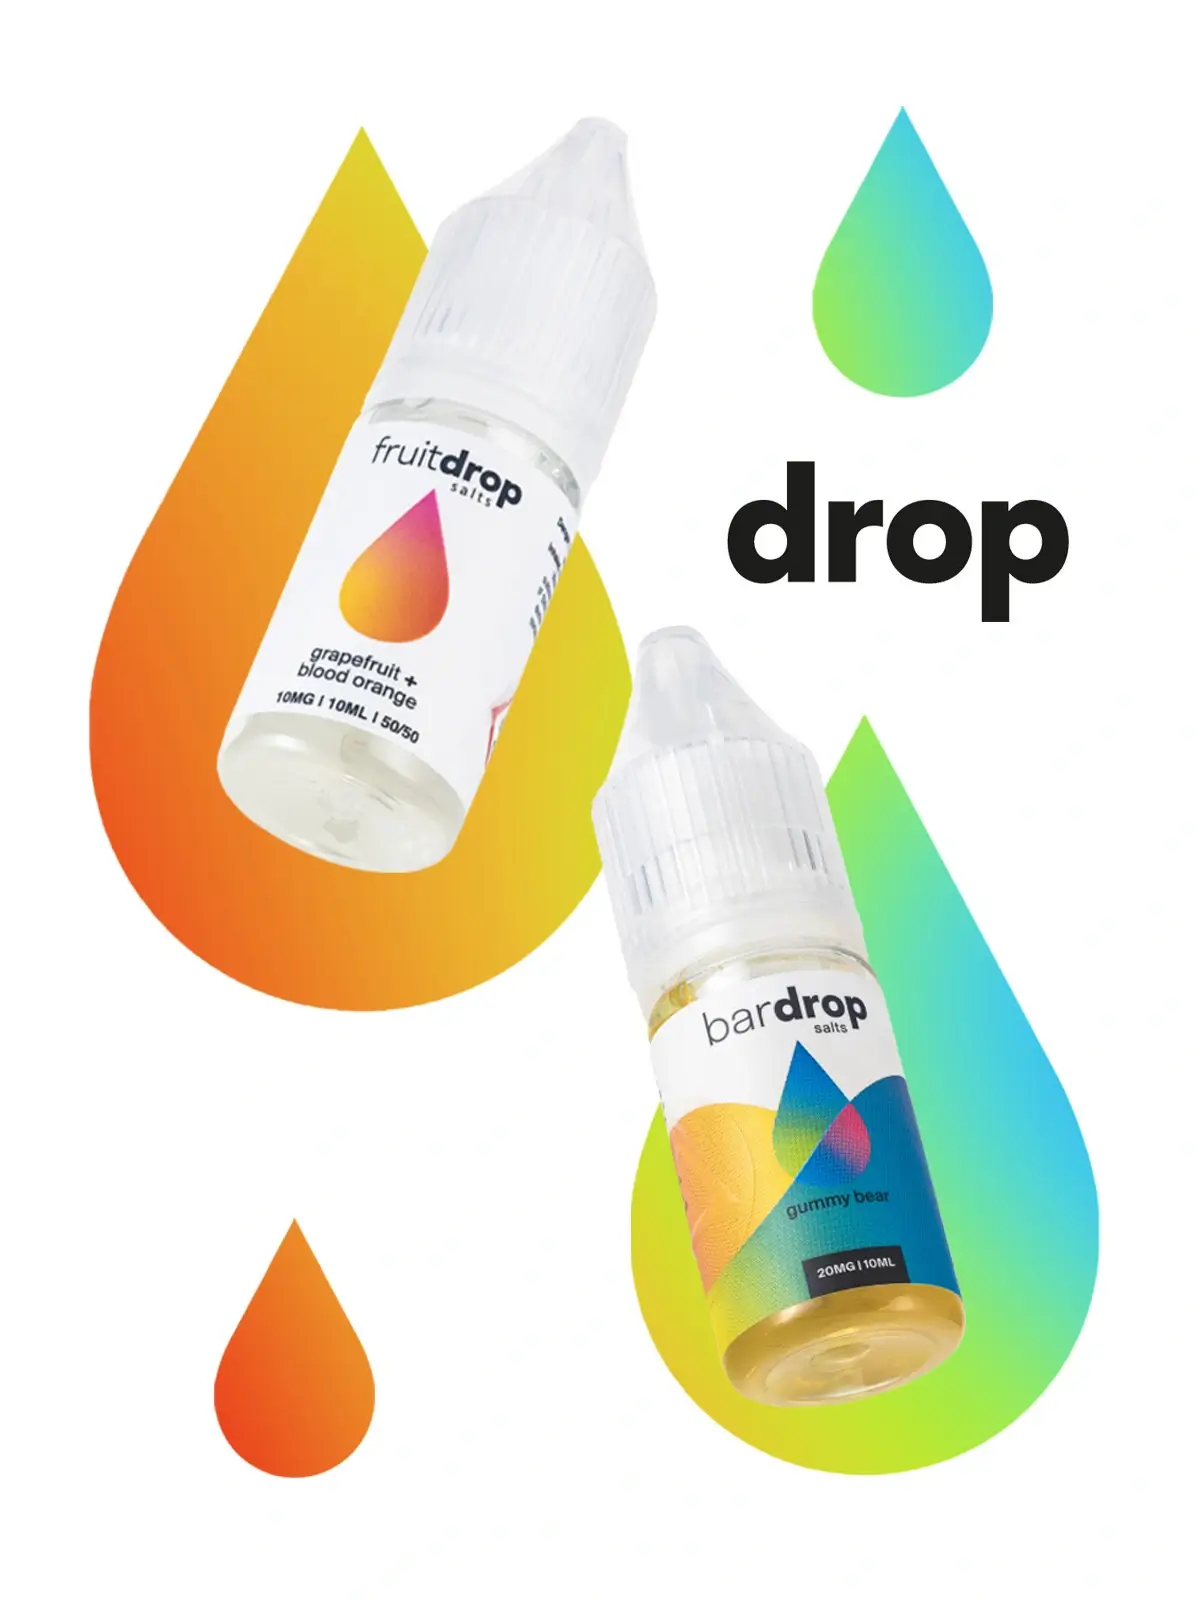 Two bottles of Drop E-liquid; Gummy Bear and Grapefruit + Blood Orange flavour, floating in front of a styled background with the Drop logo